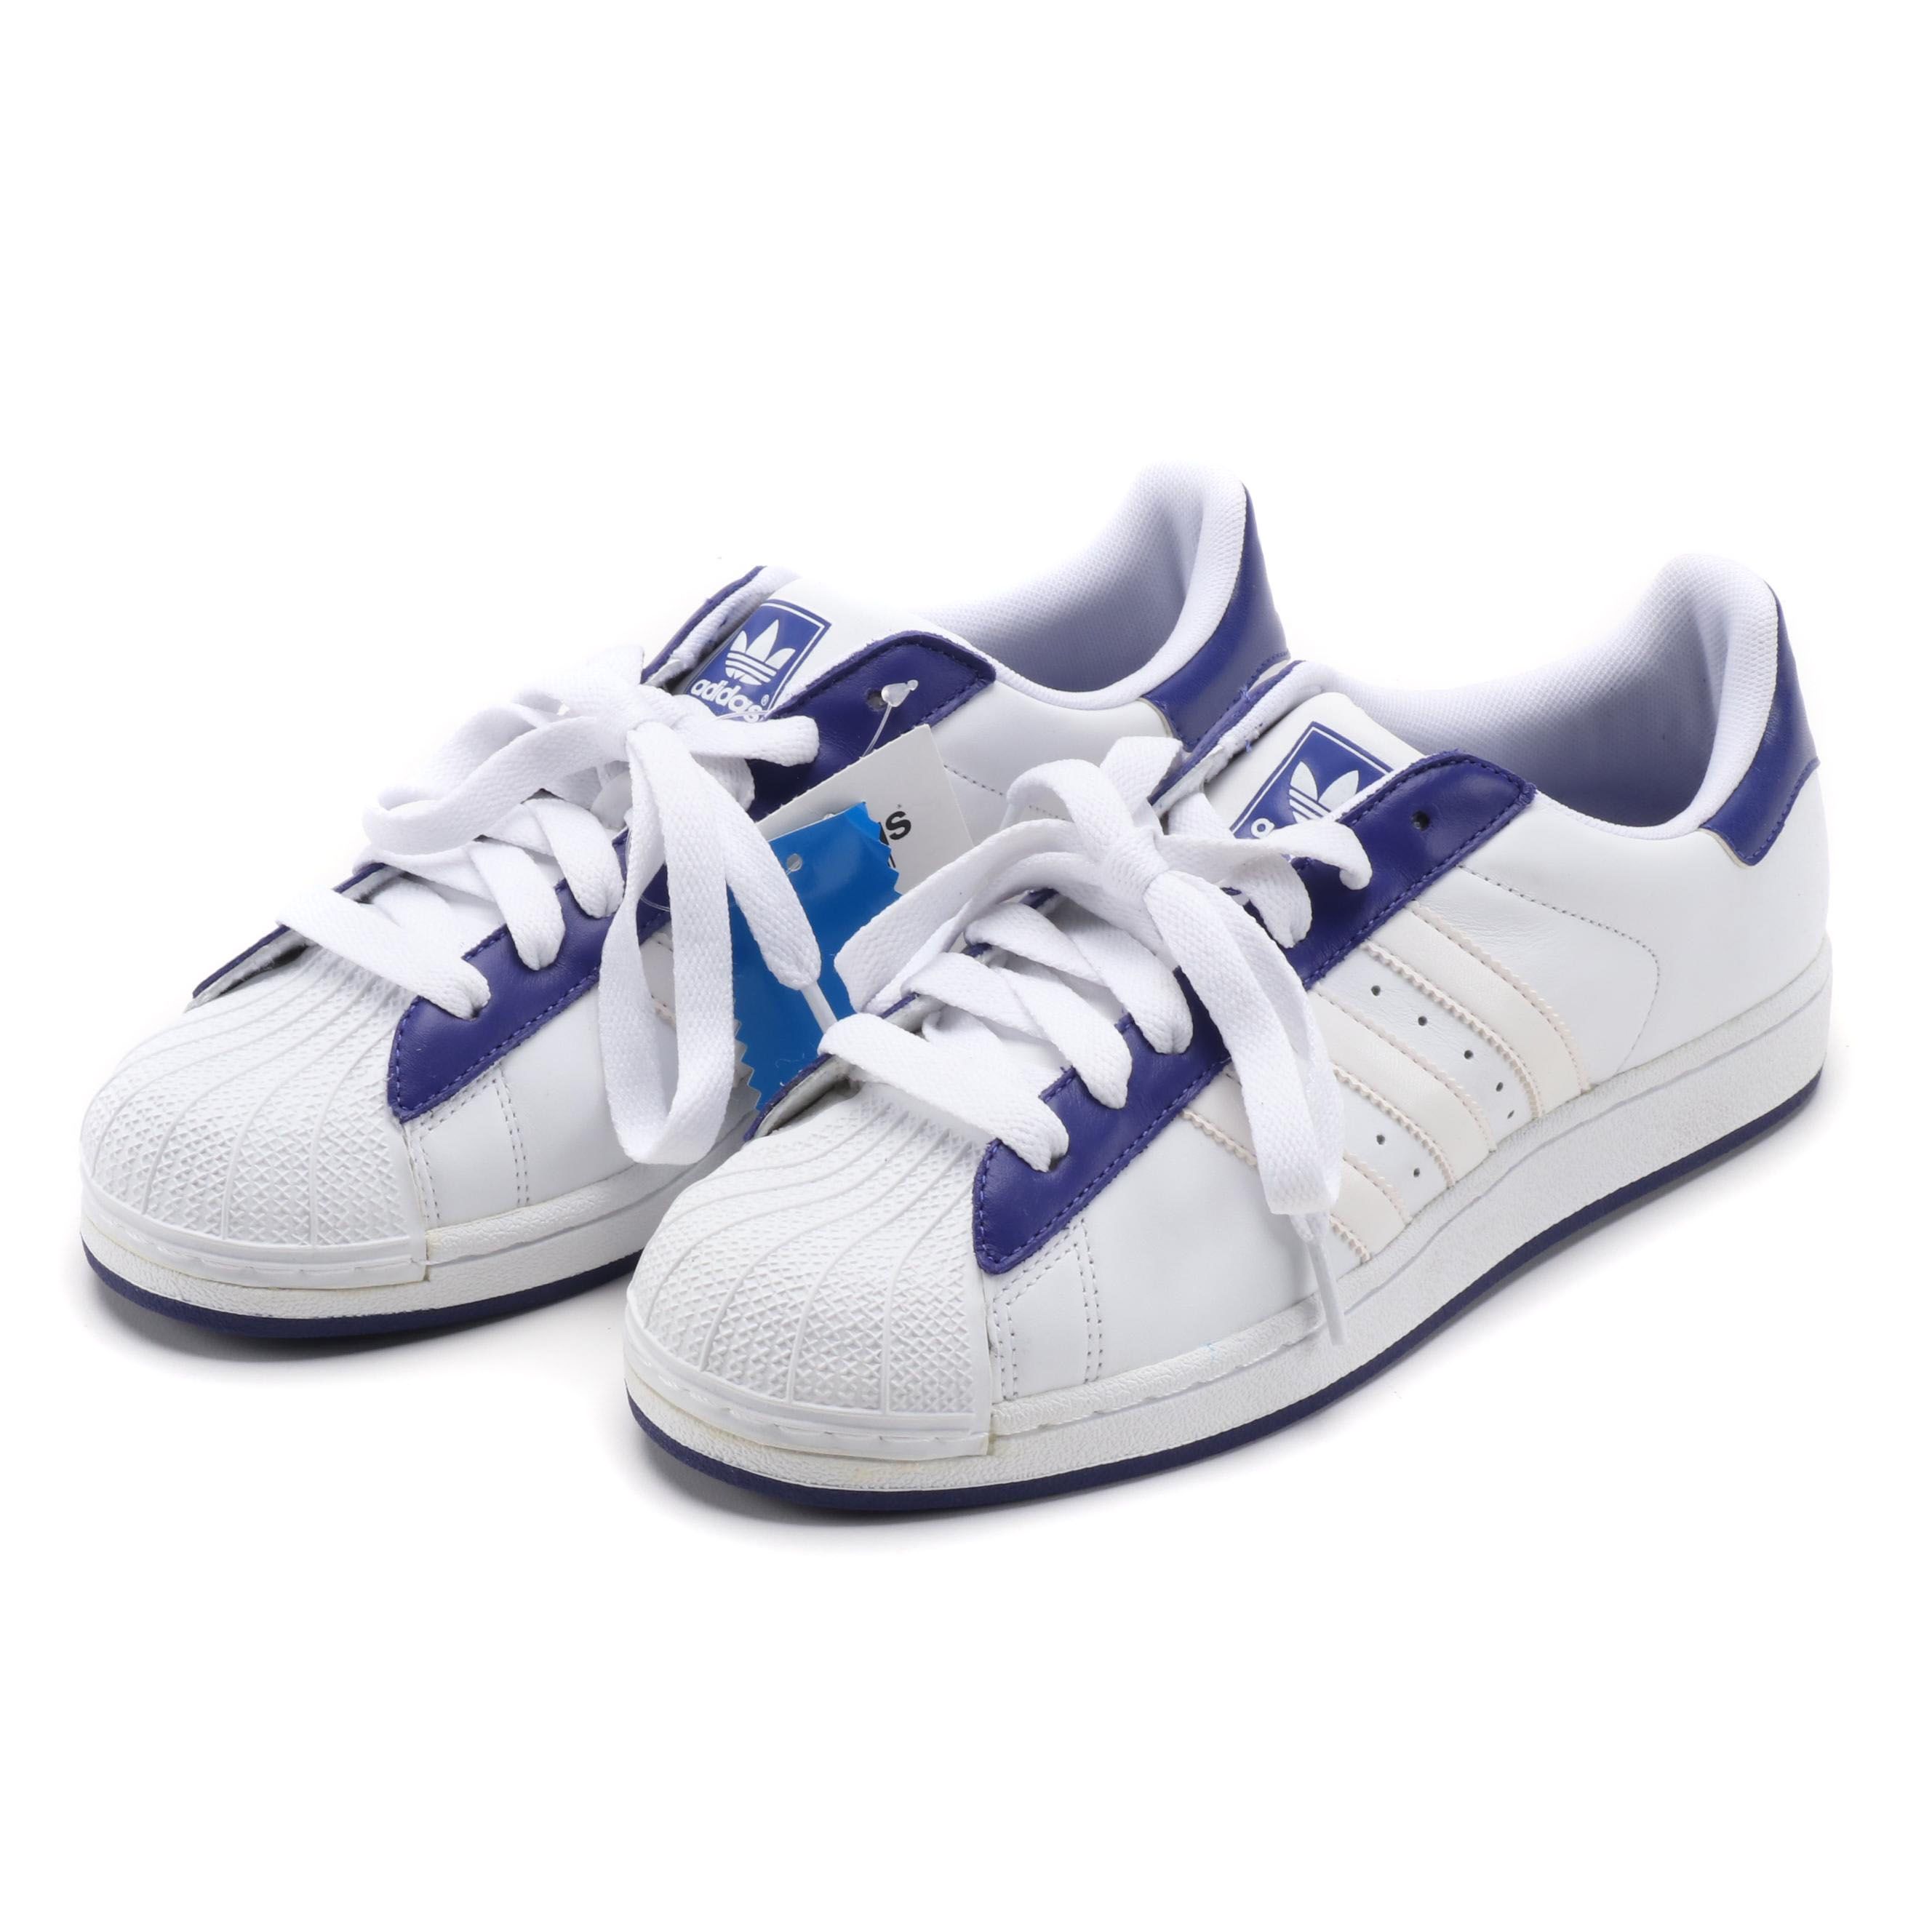 adidas men's superstar ii white blue leather shoes